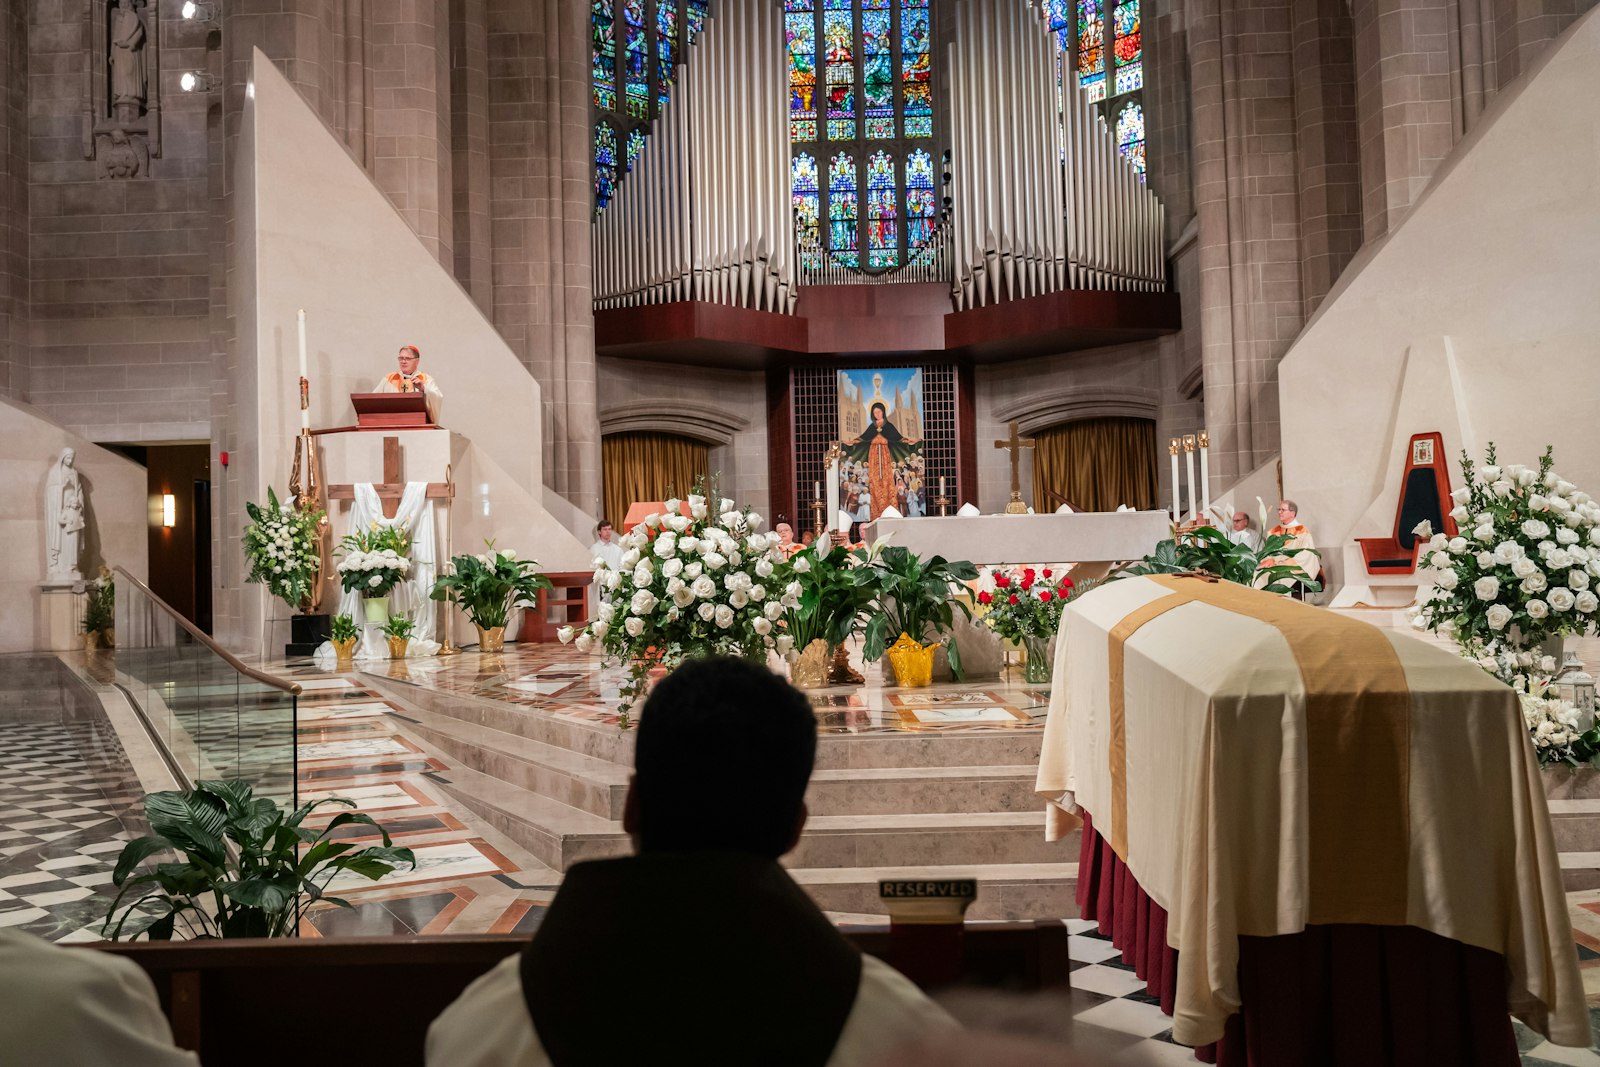 Cardinal Tobin preaches to a cathedral full of mourners April 13 during the funeral Mass for retired Detroit Auxiliary Bishop Thomas J. Gumbleton. Earlier in the week, visitations were held for Bishop Gumbleton at the IHM Sisters' motherhouse in Monroe, Sacred Heart Church in Detroit, and Chas. Verheyden Funeral Home in Grosse Pointe Park.